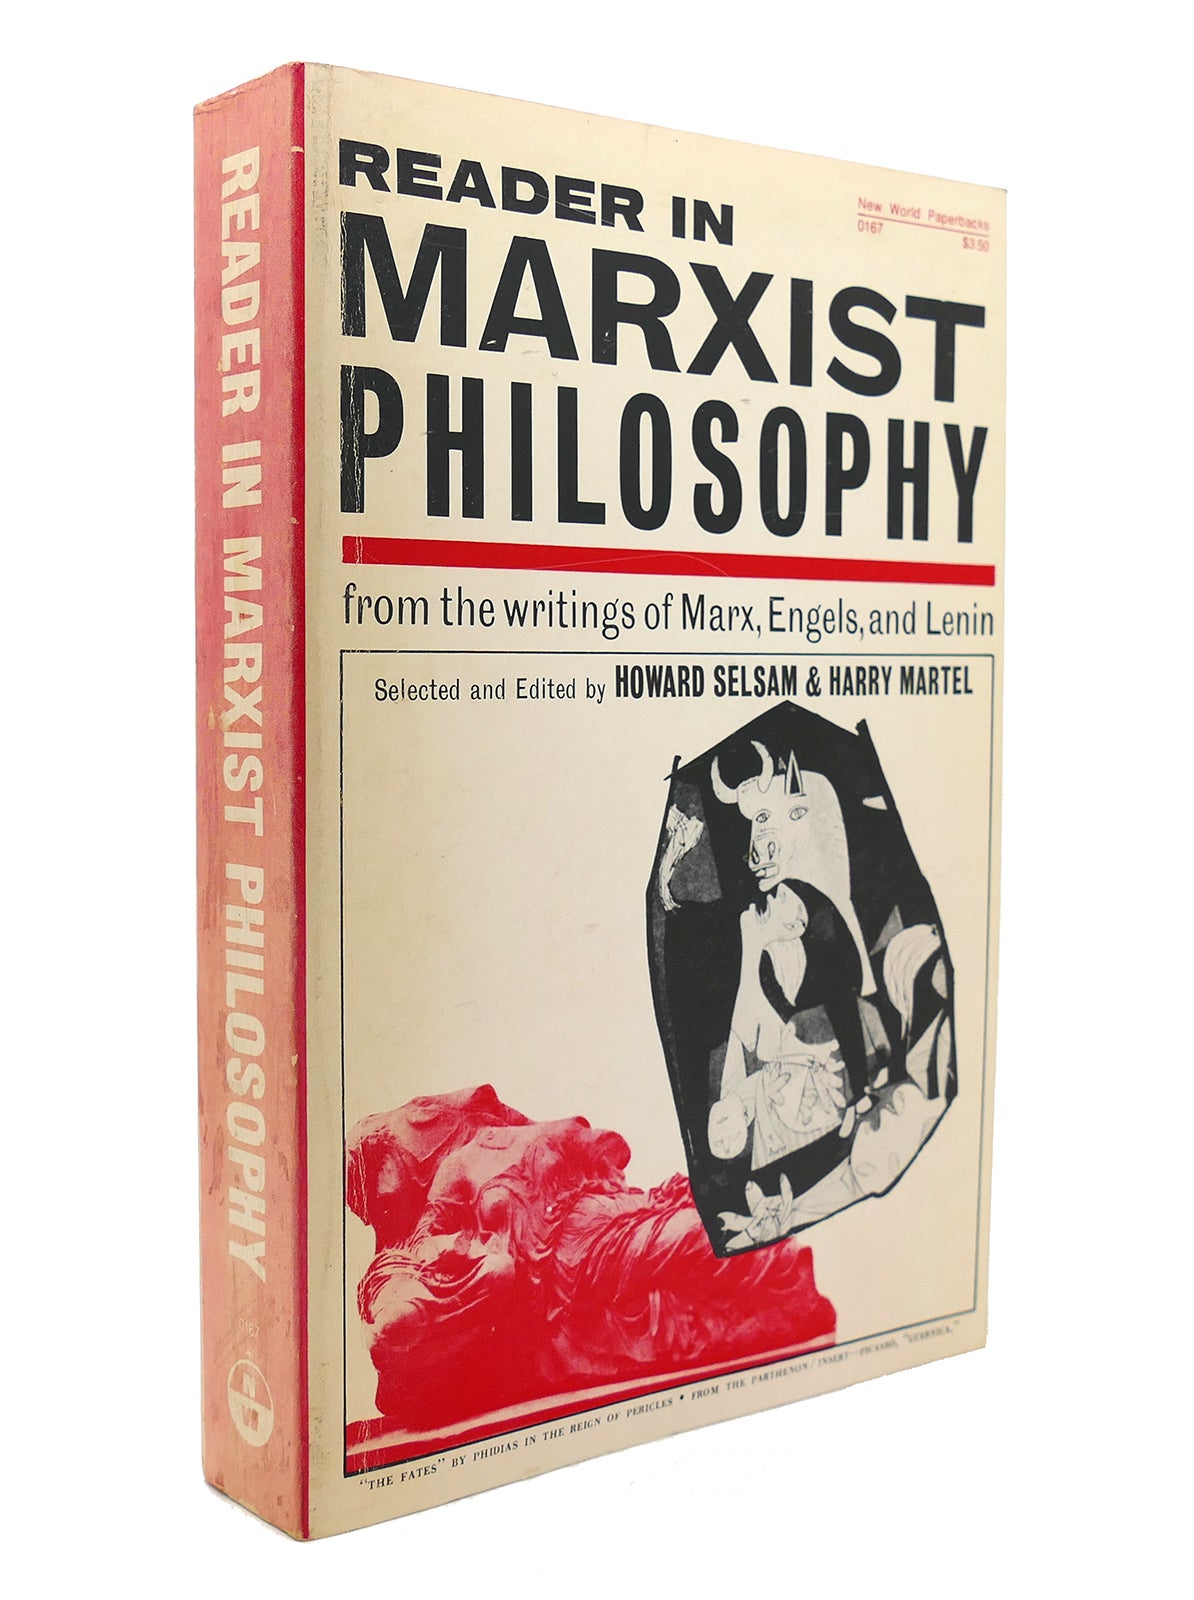 Harry　Lenin　Marx,　From　Selsam,　Printing　MARXIST　PHILOSOPHY　the　and　Engels　Ninth　Writings　of　Howard　Edition;　Martel　First　READER　IN